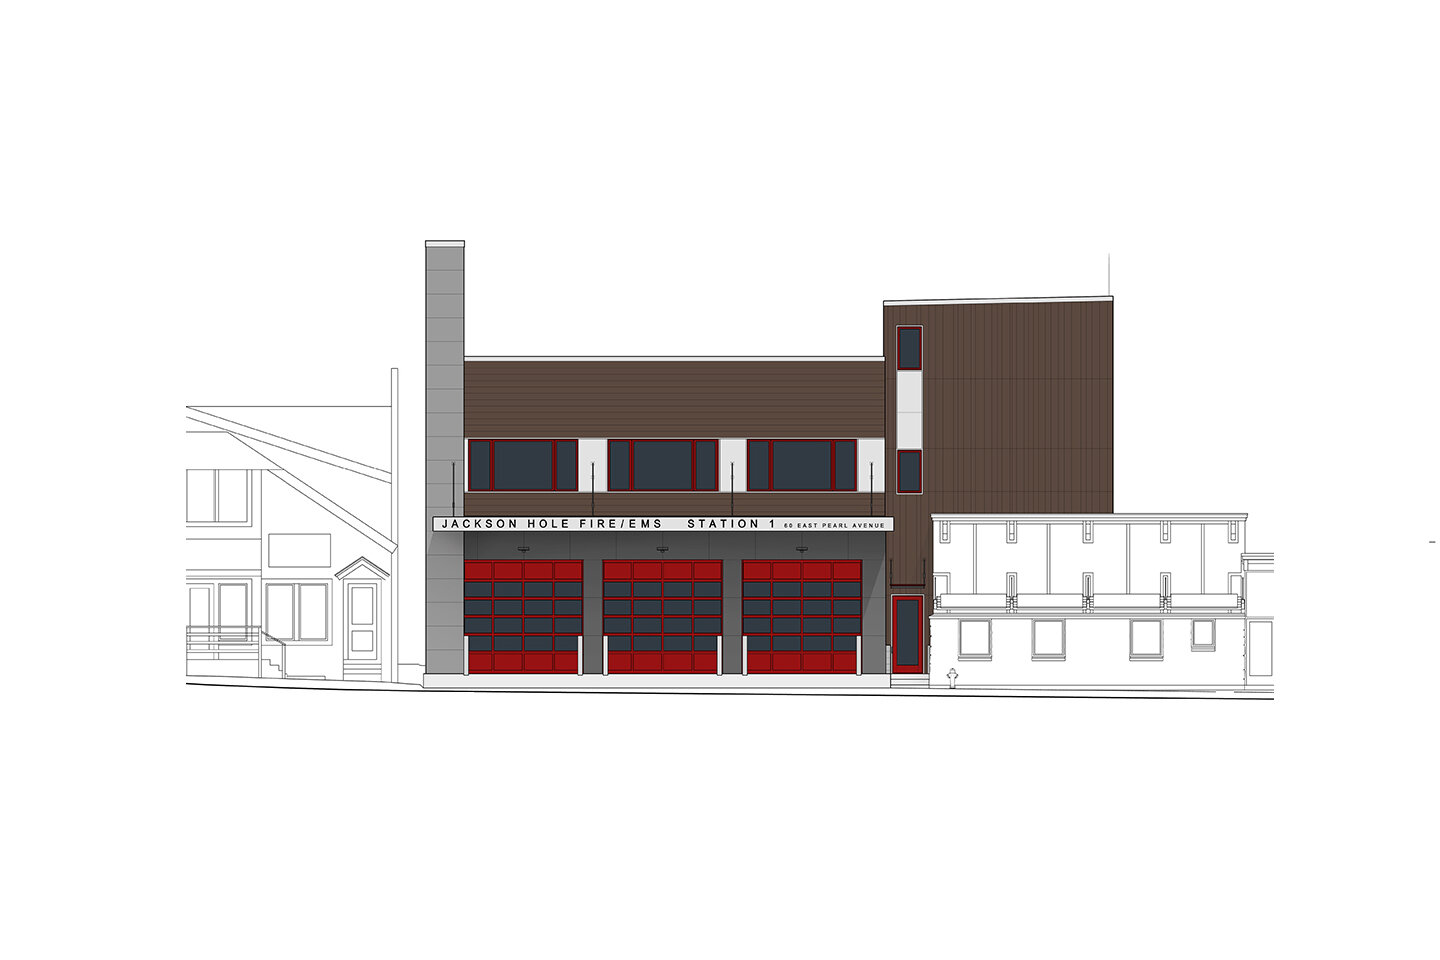 North elevation of future fire station in Jackson Wyoming